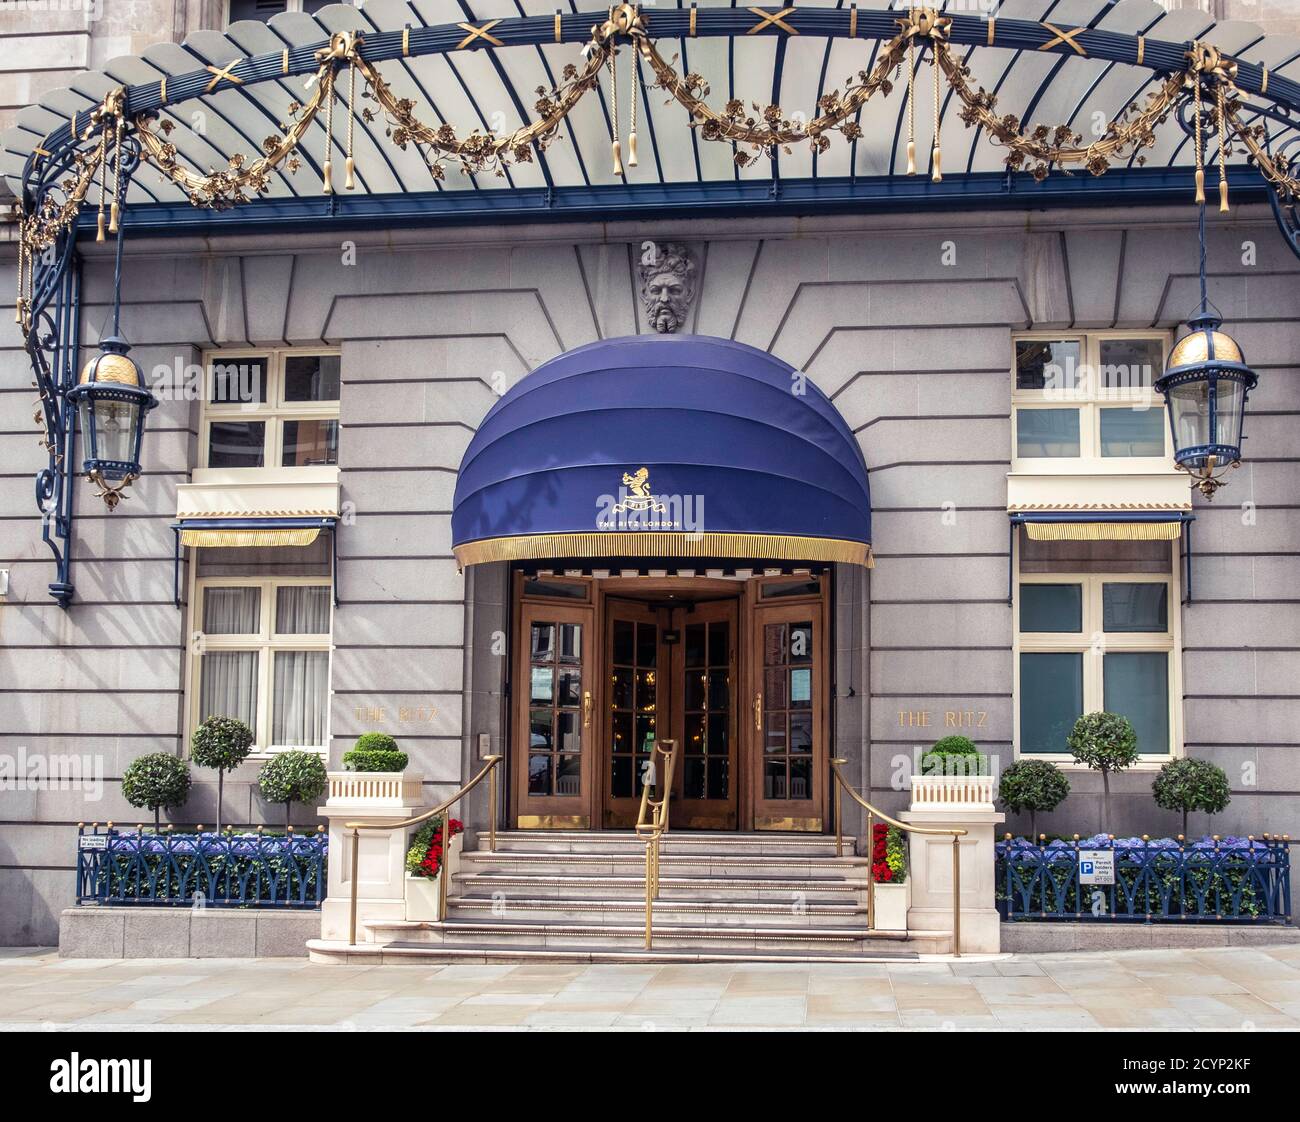 The entrance to The Ritz hotel, London during the covid-19 pandemic. Stock Photo